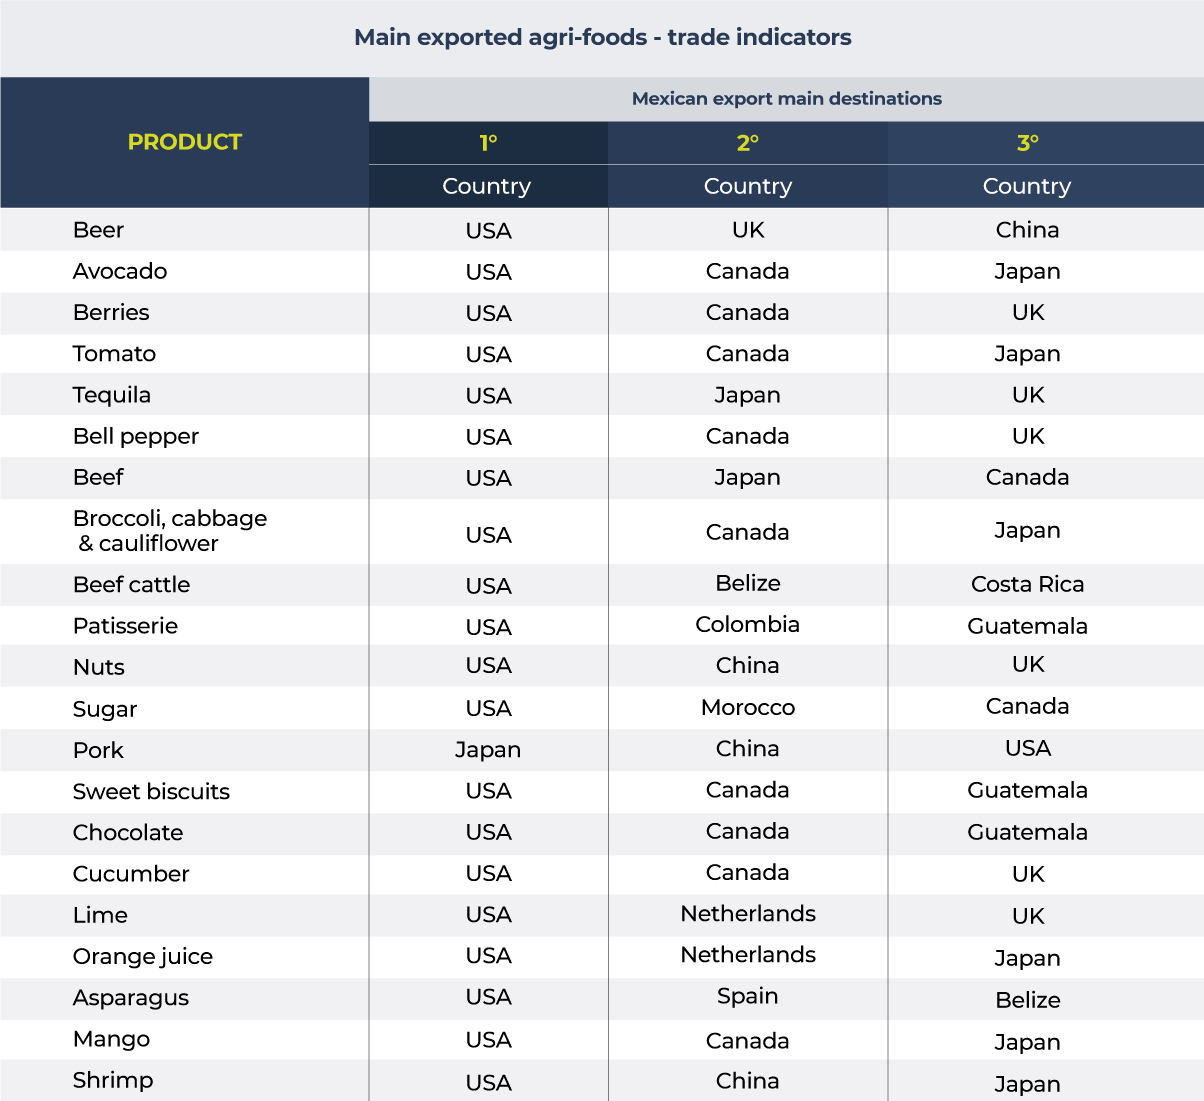 Main exported agri-foods - trade indicators. The first ones in the list are beer, avocado and berries